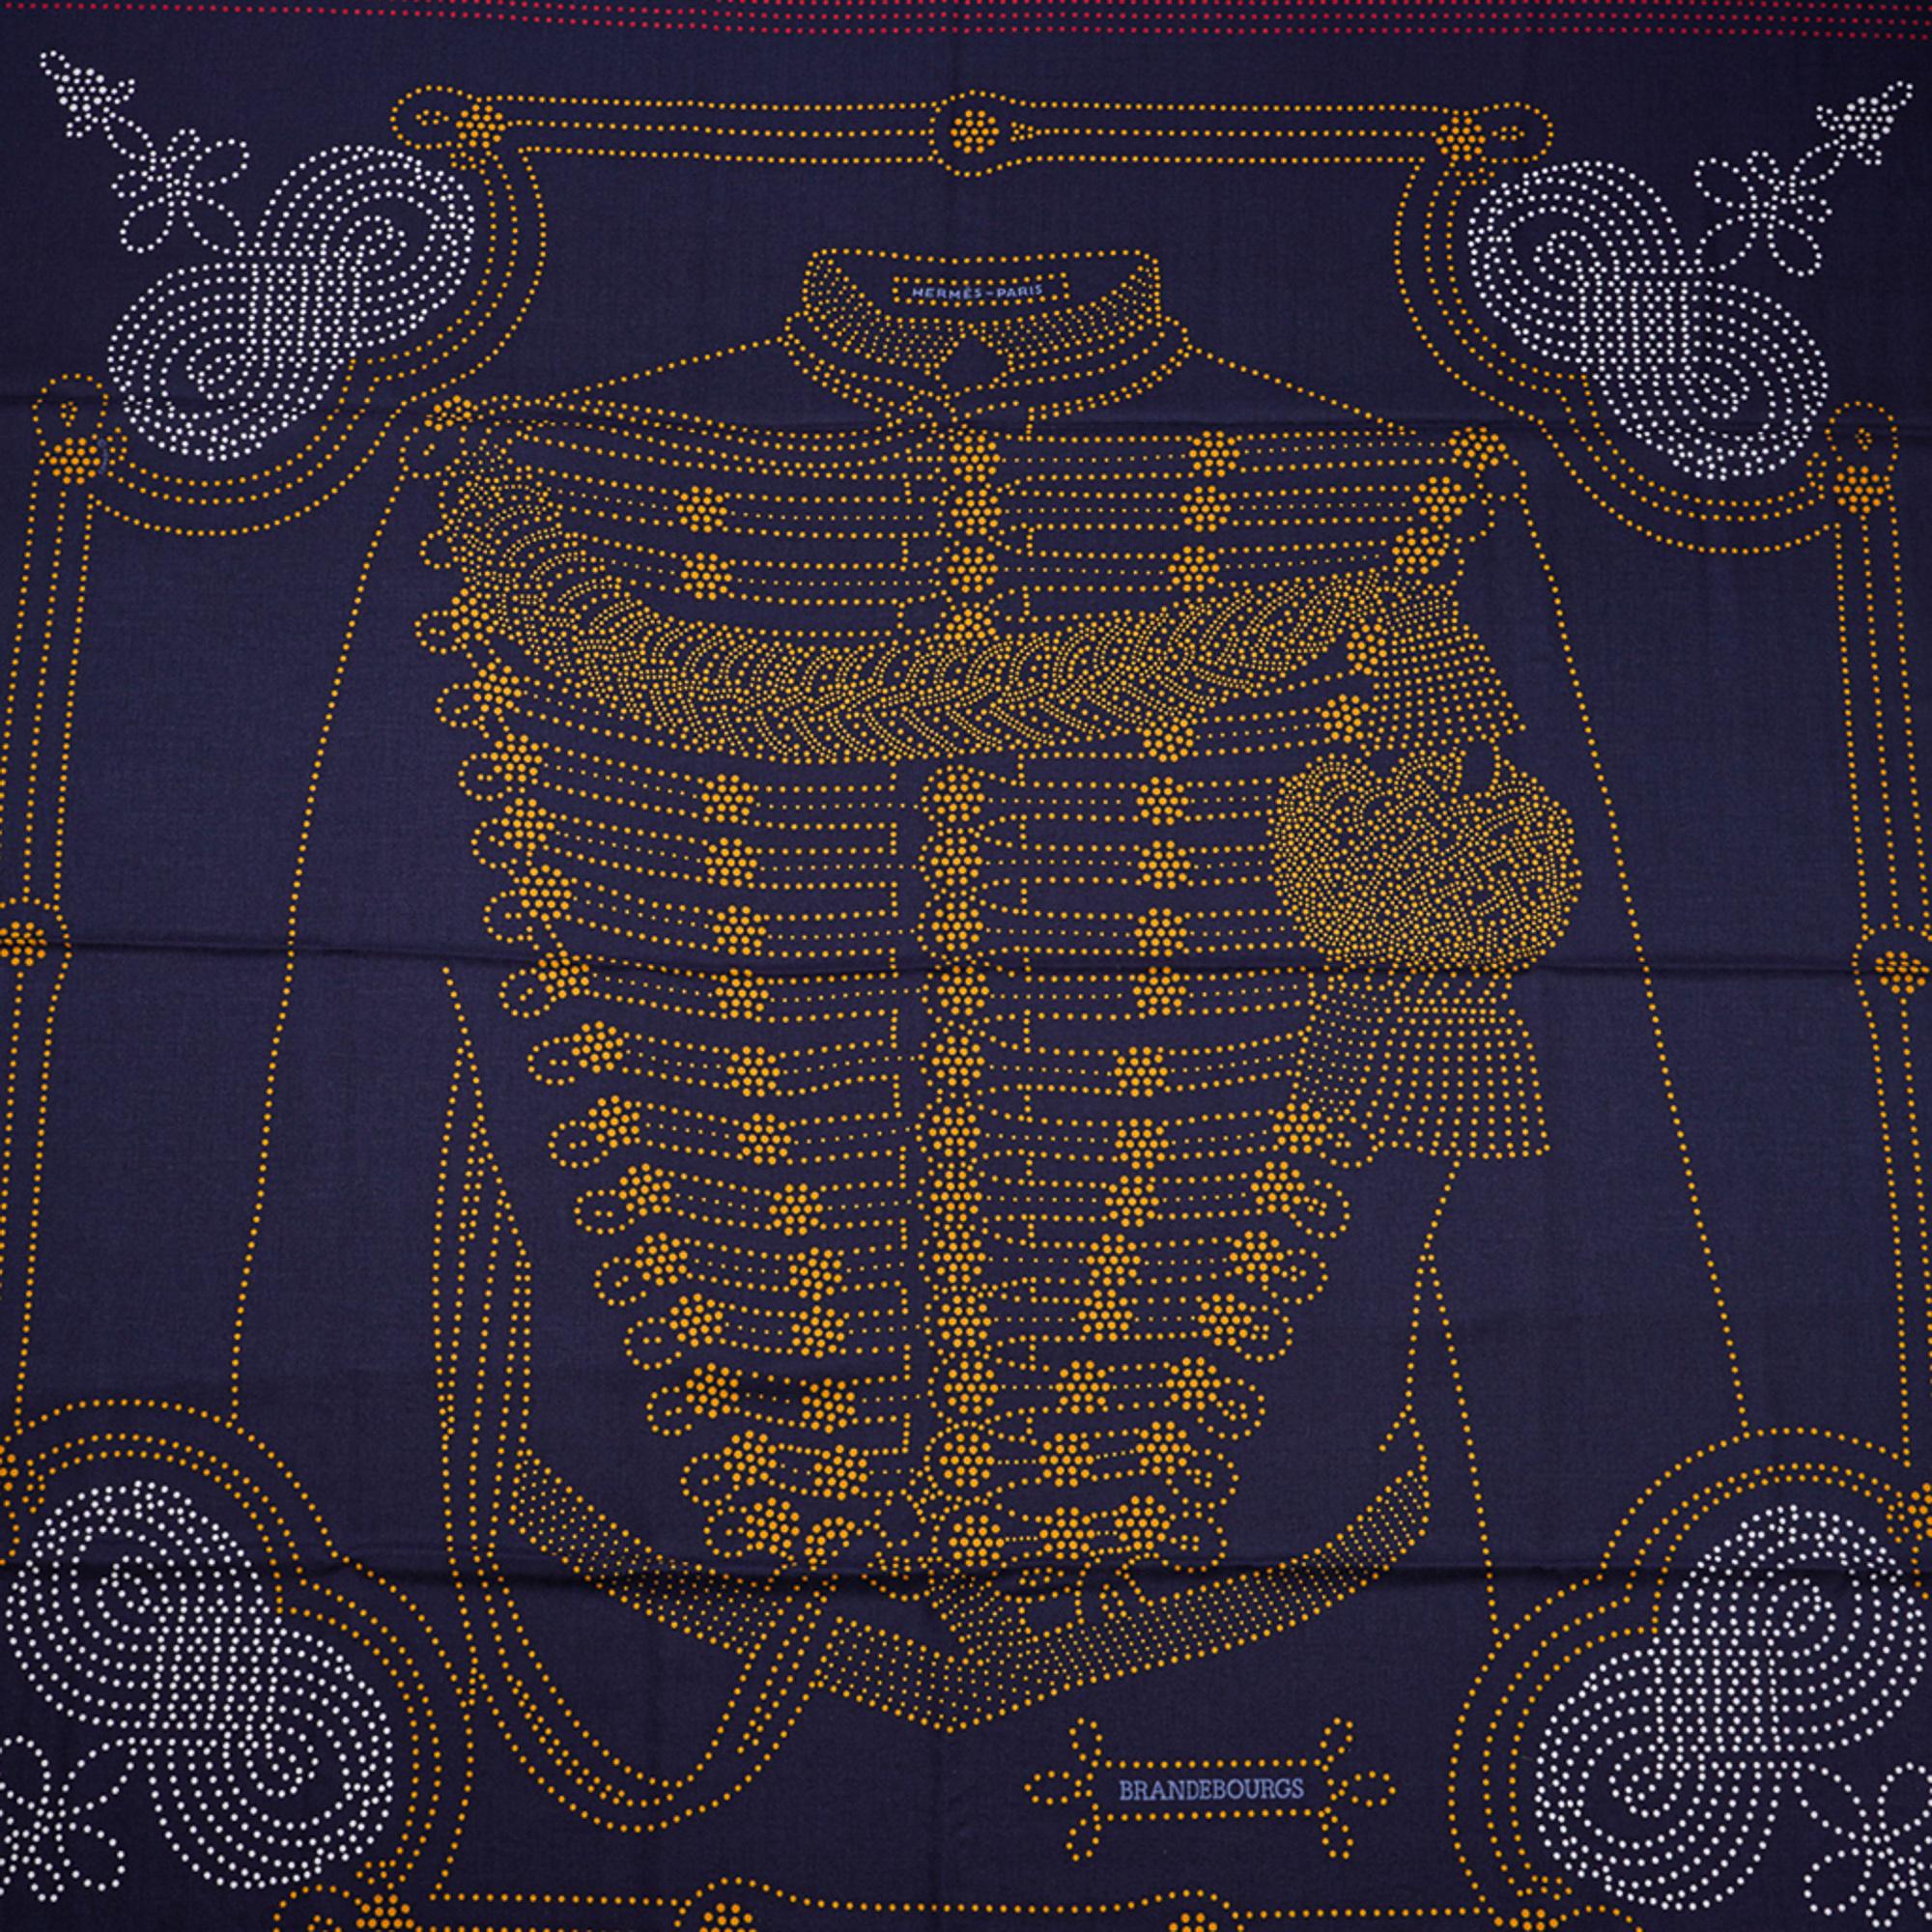 Mightychic offers an Hermes Brandebourgs Points Cashmere and Silk shawl.
Inspired by the uniforms of the Second Empire Imperial Guard.
Designed by Caty Latham.
Exquisite in Bleu Noir, Gold and Rouge.
Signature hand rolled edge.
Comes with Signature